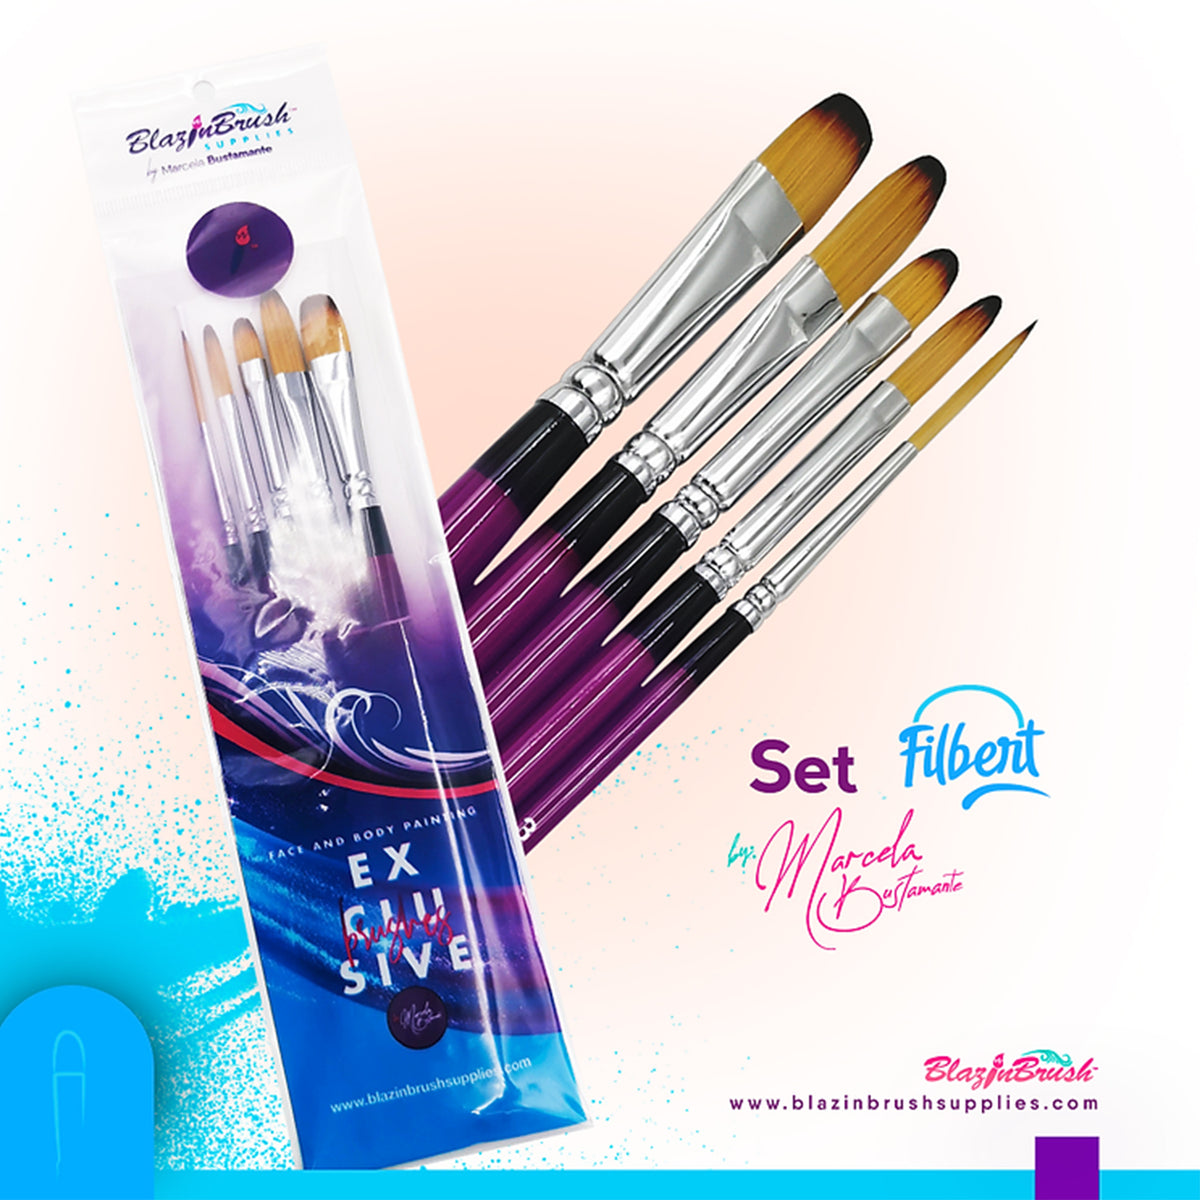 Blazin Brushes by Marcela Bustamante - Filbert Collection (Set of 5 Brushes)